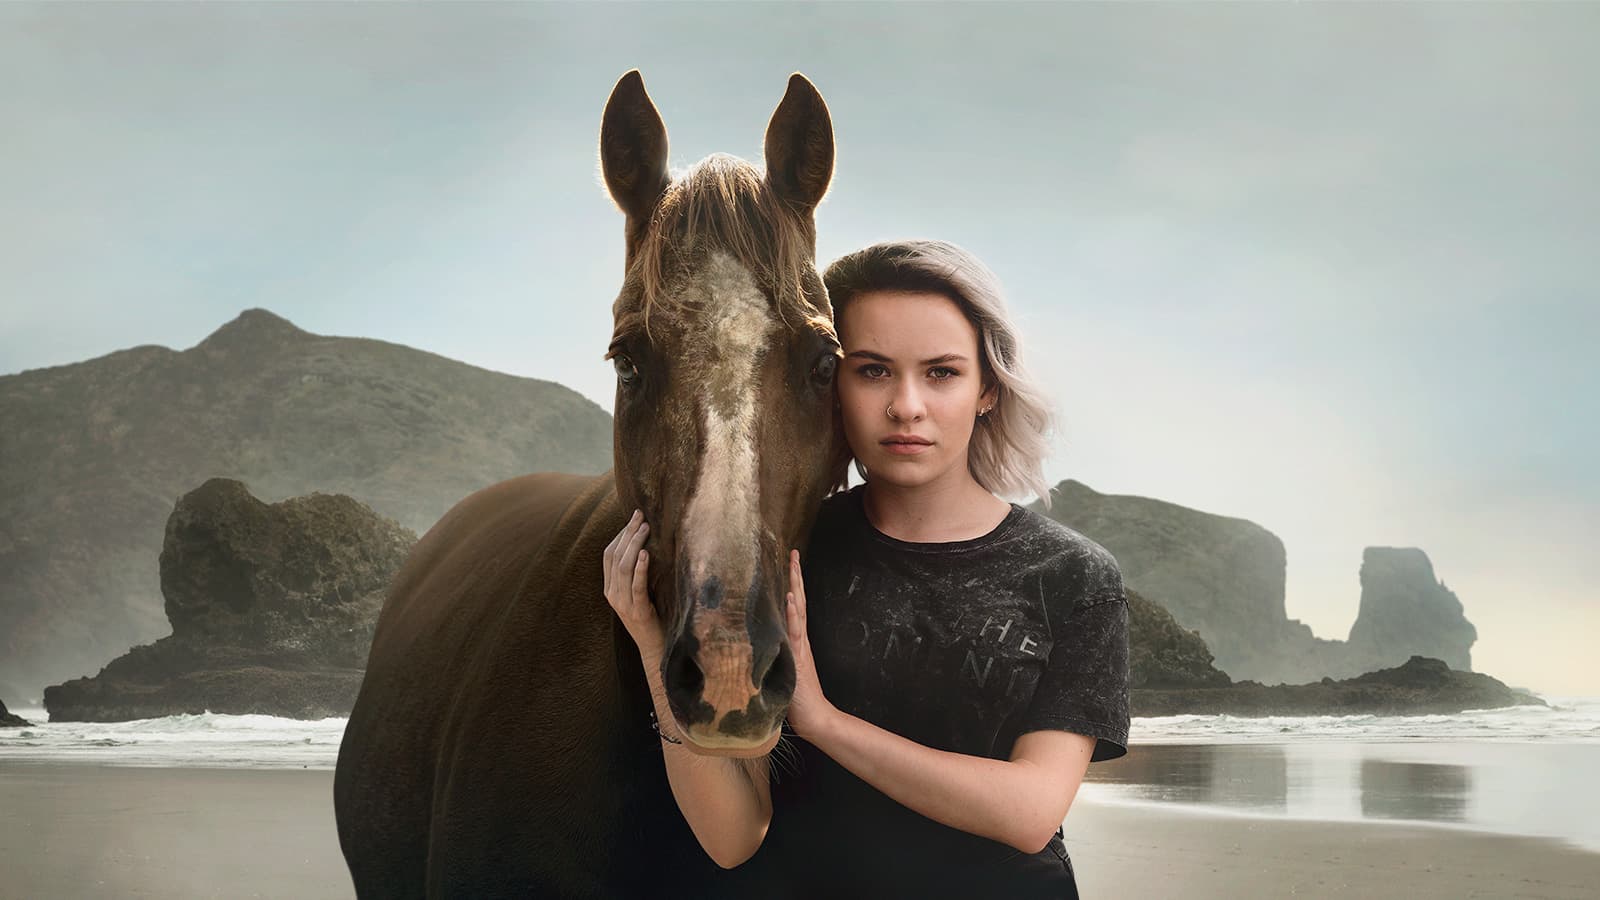 Mystic Poster lady with a horse on a beach